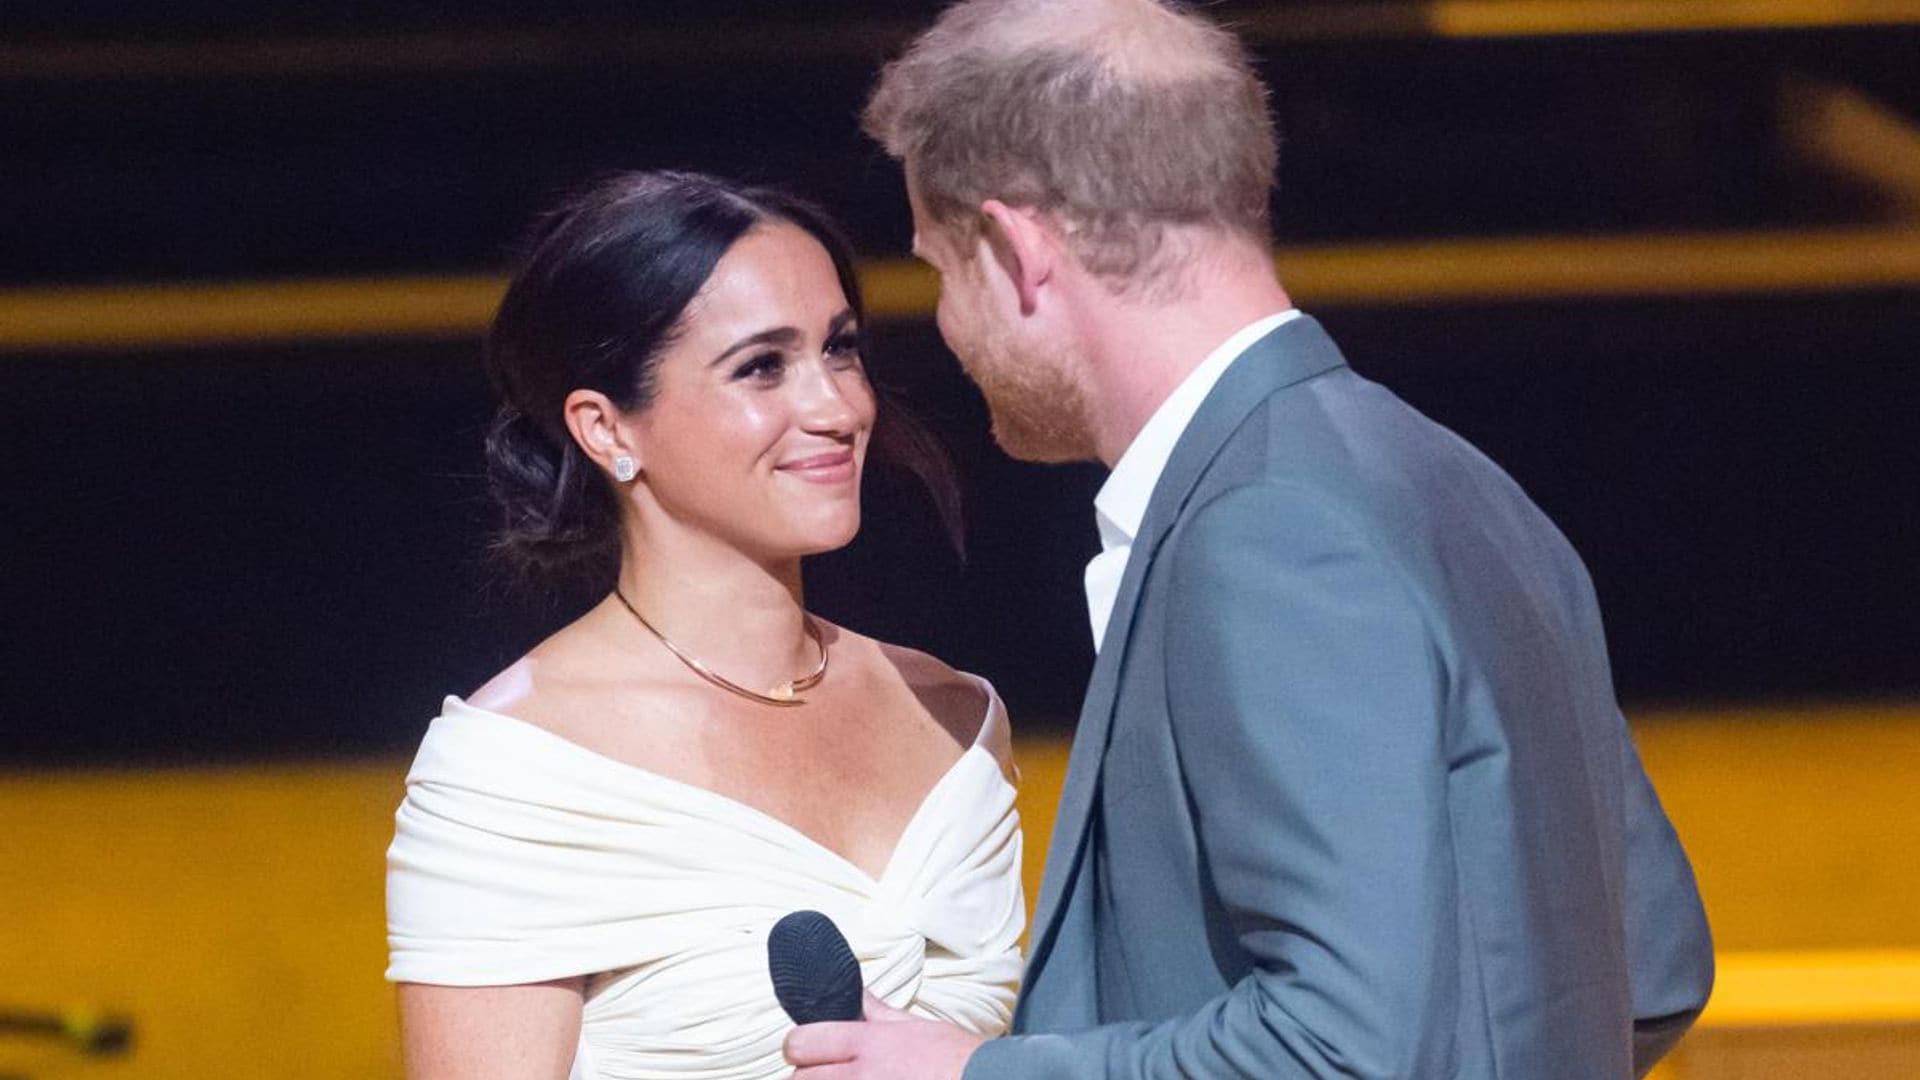 Meghan Markle and Prince Harry share kiss at Invictus Games